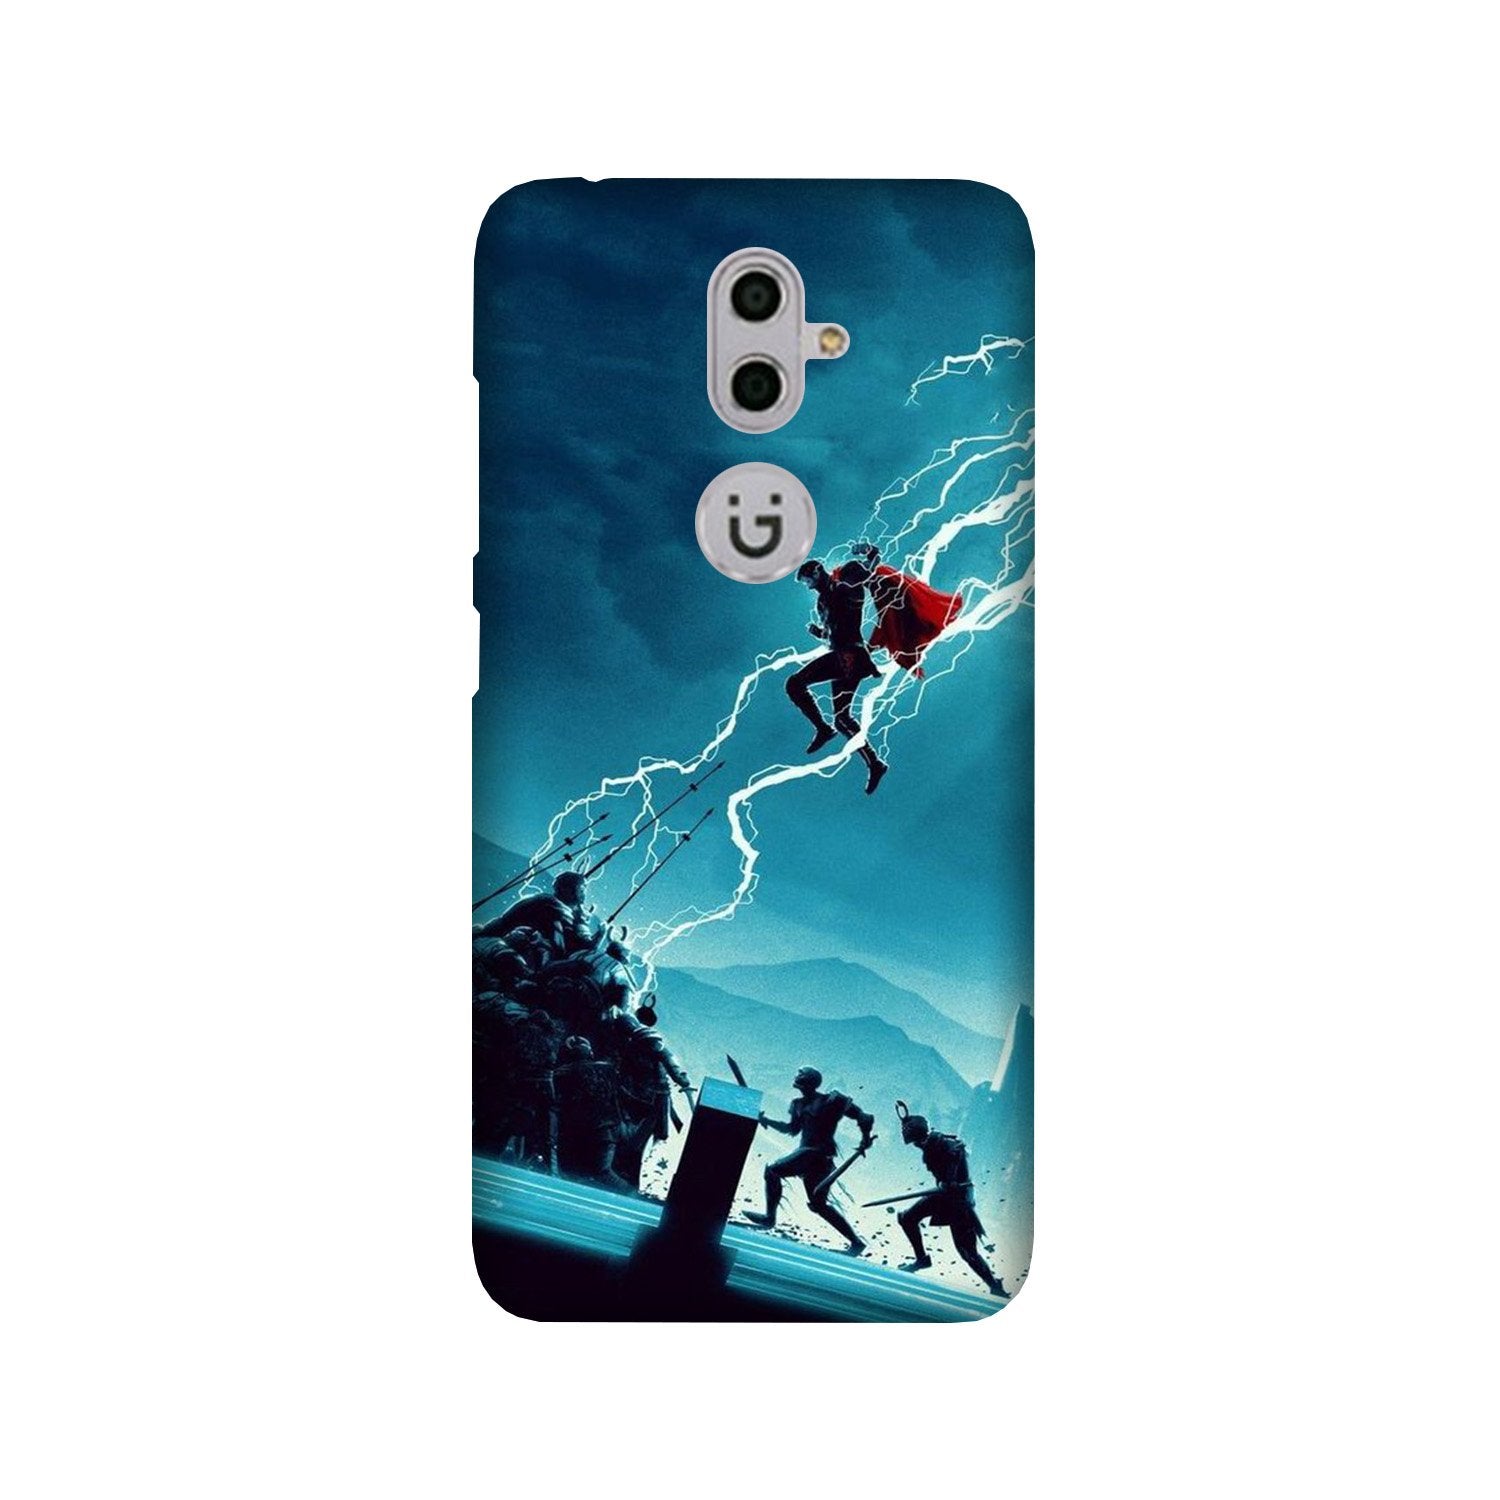 Thor Avengers Case for Gionee S9 (Design No. 243)